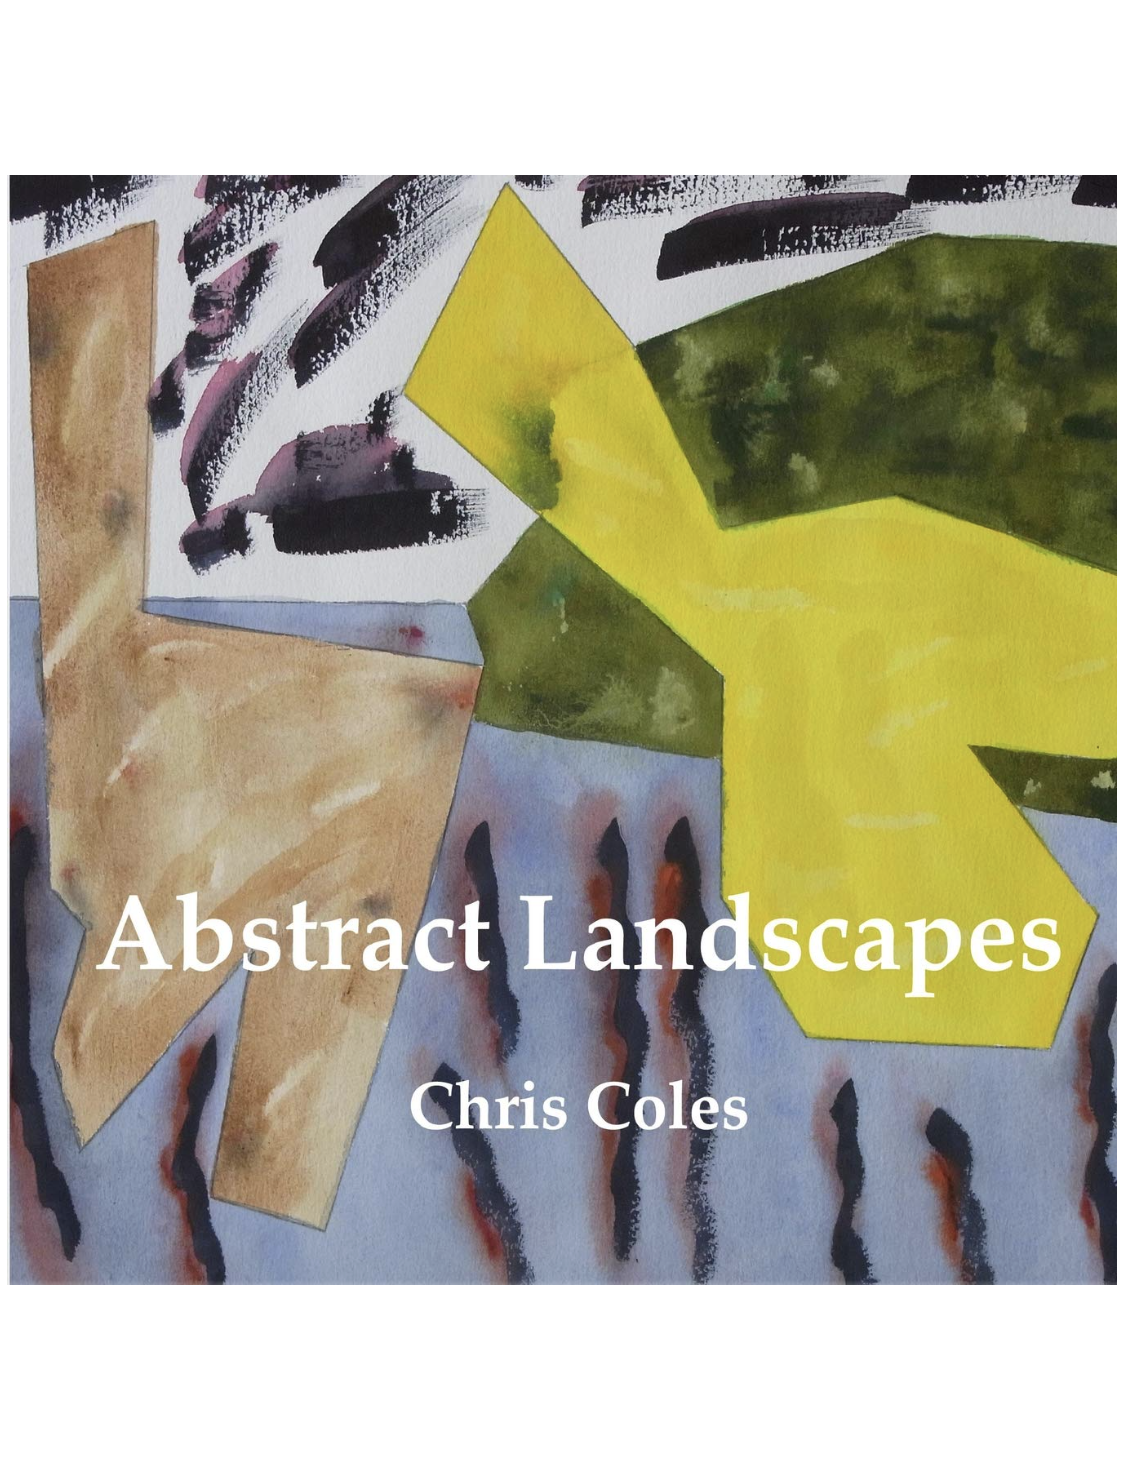 Abstract Landscapes by Chris Coles